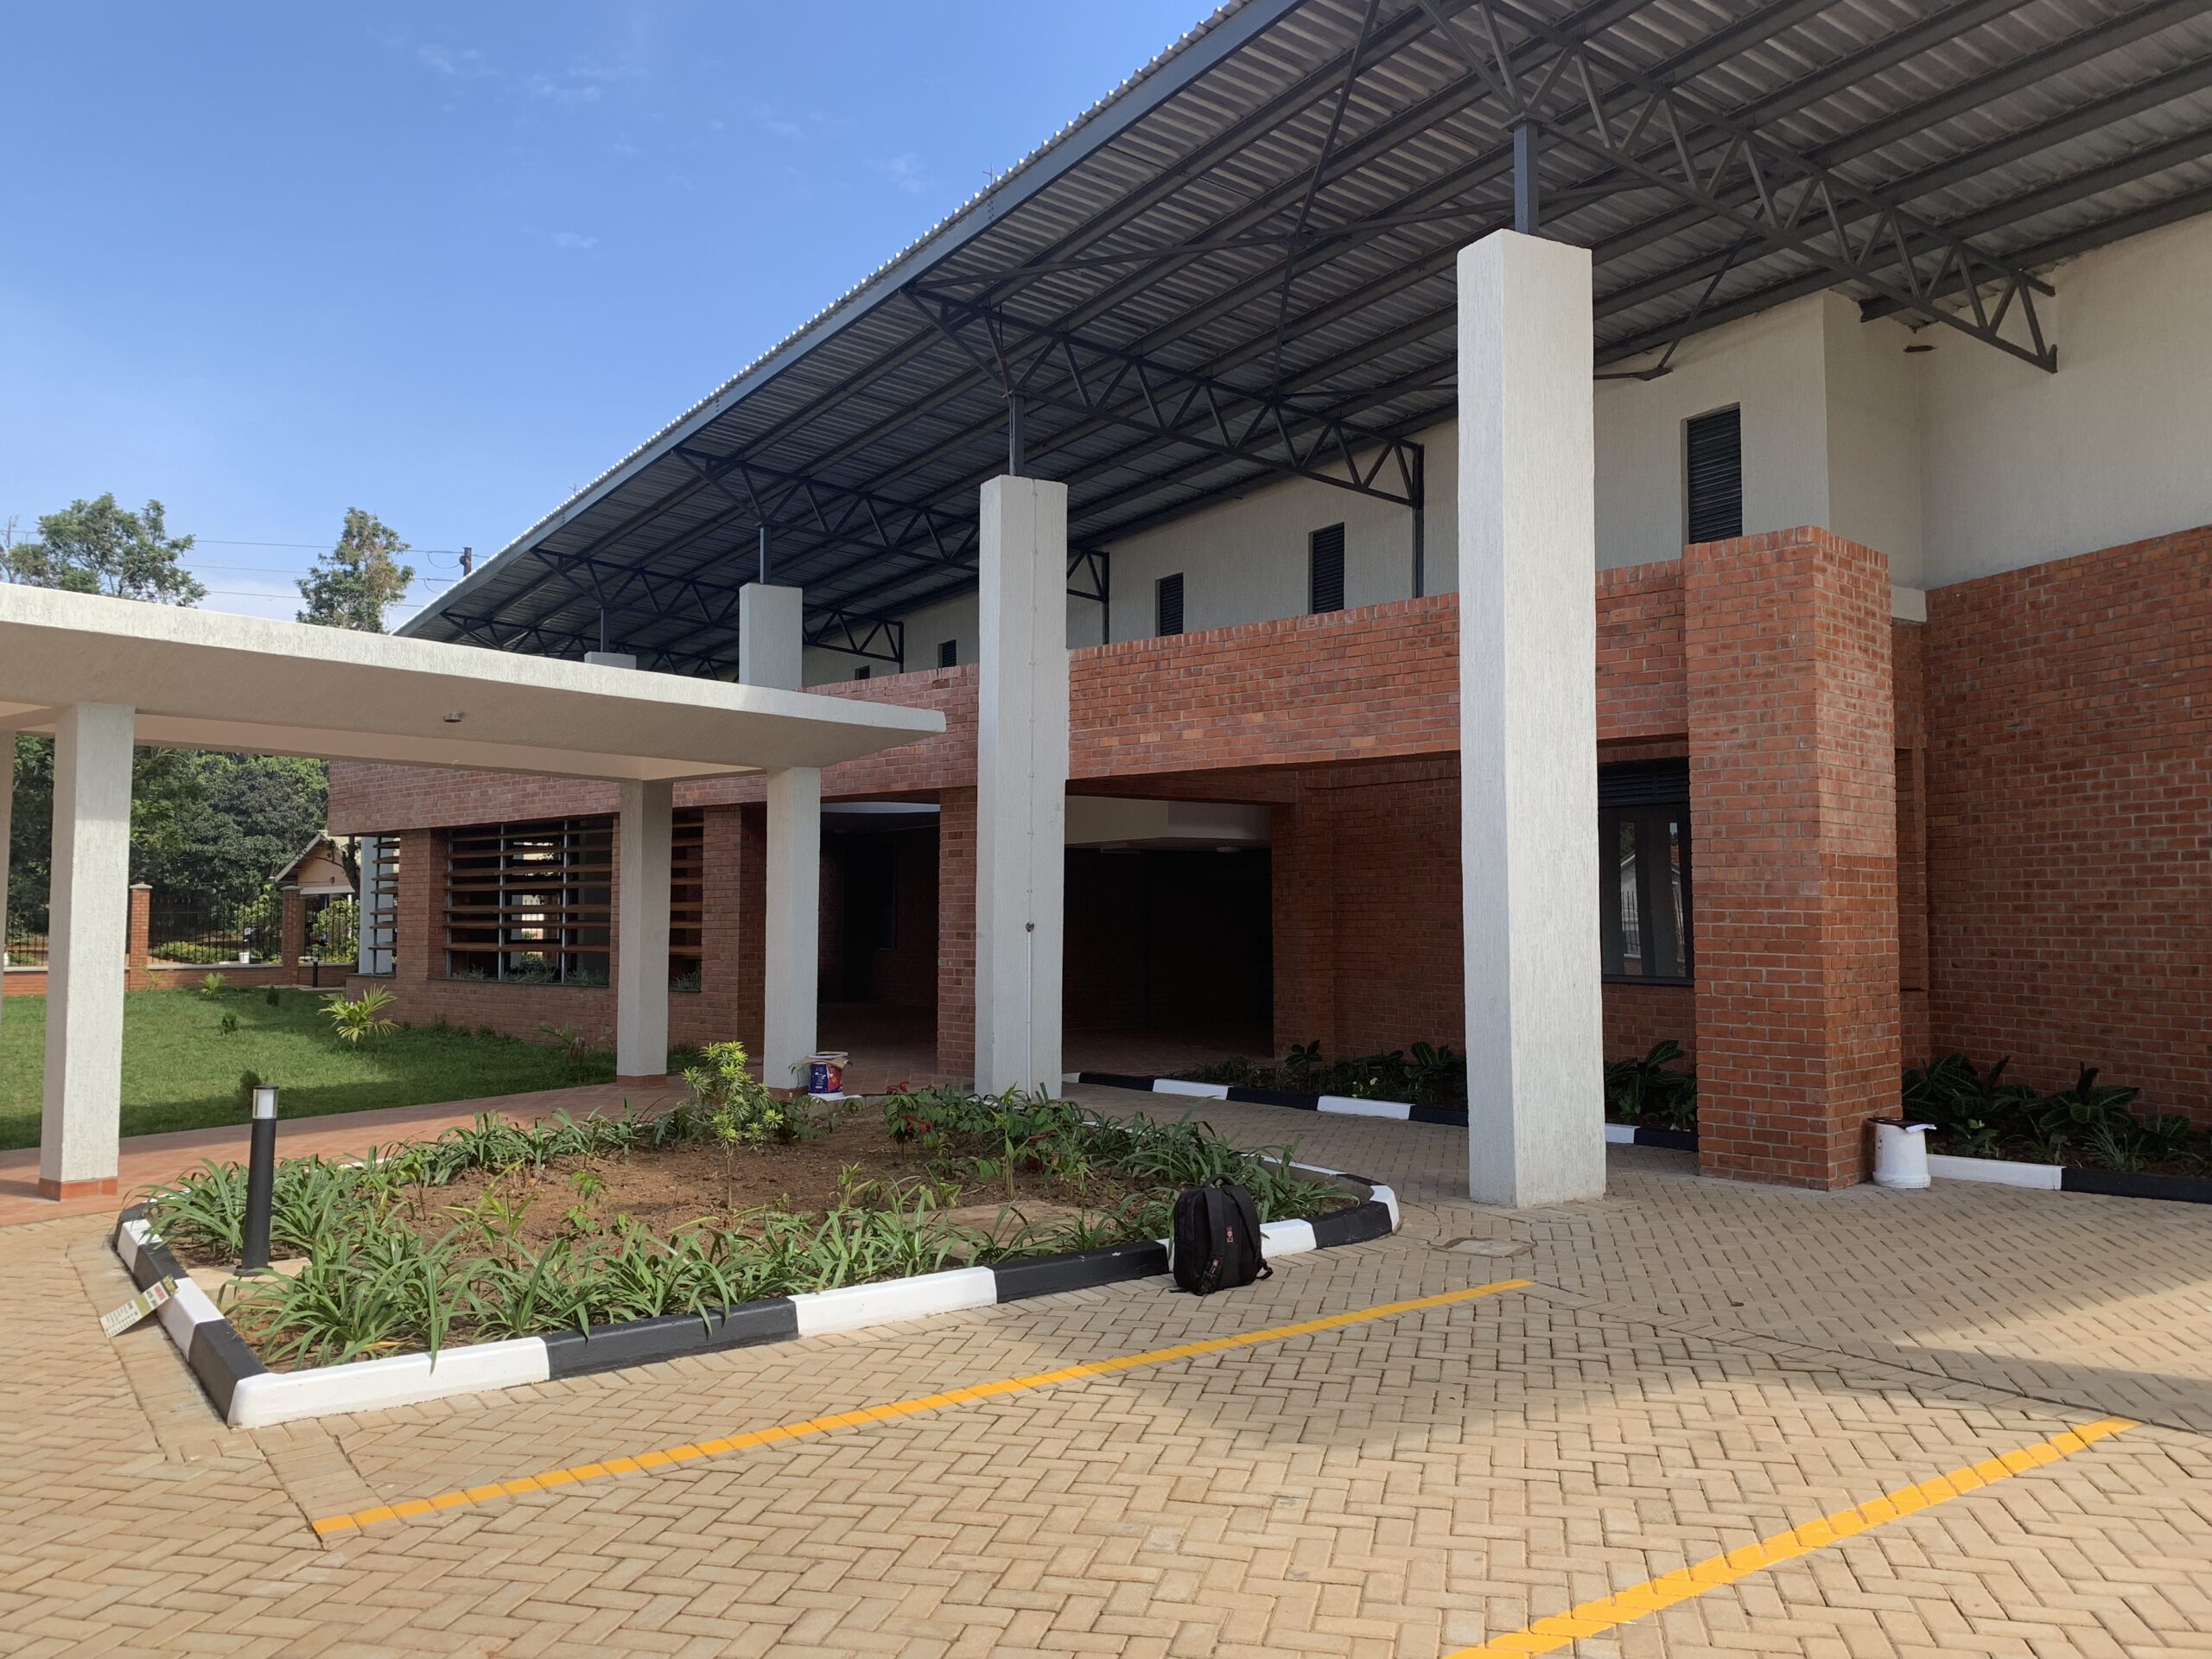 FBW GROUP DELIVERS STATE-OF-THE ART  ENTEBBE RESEARCH CLINIC